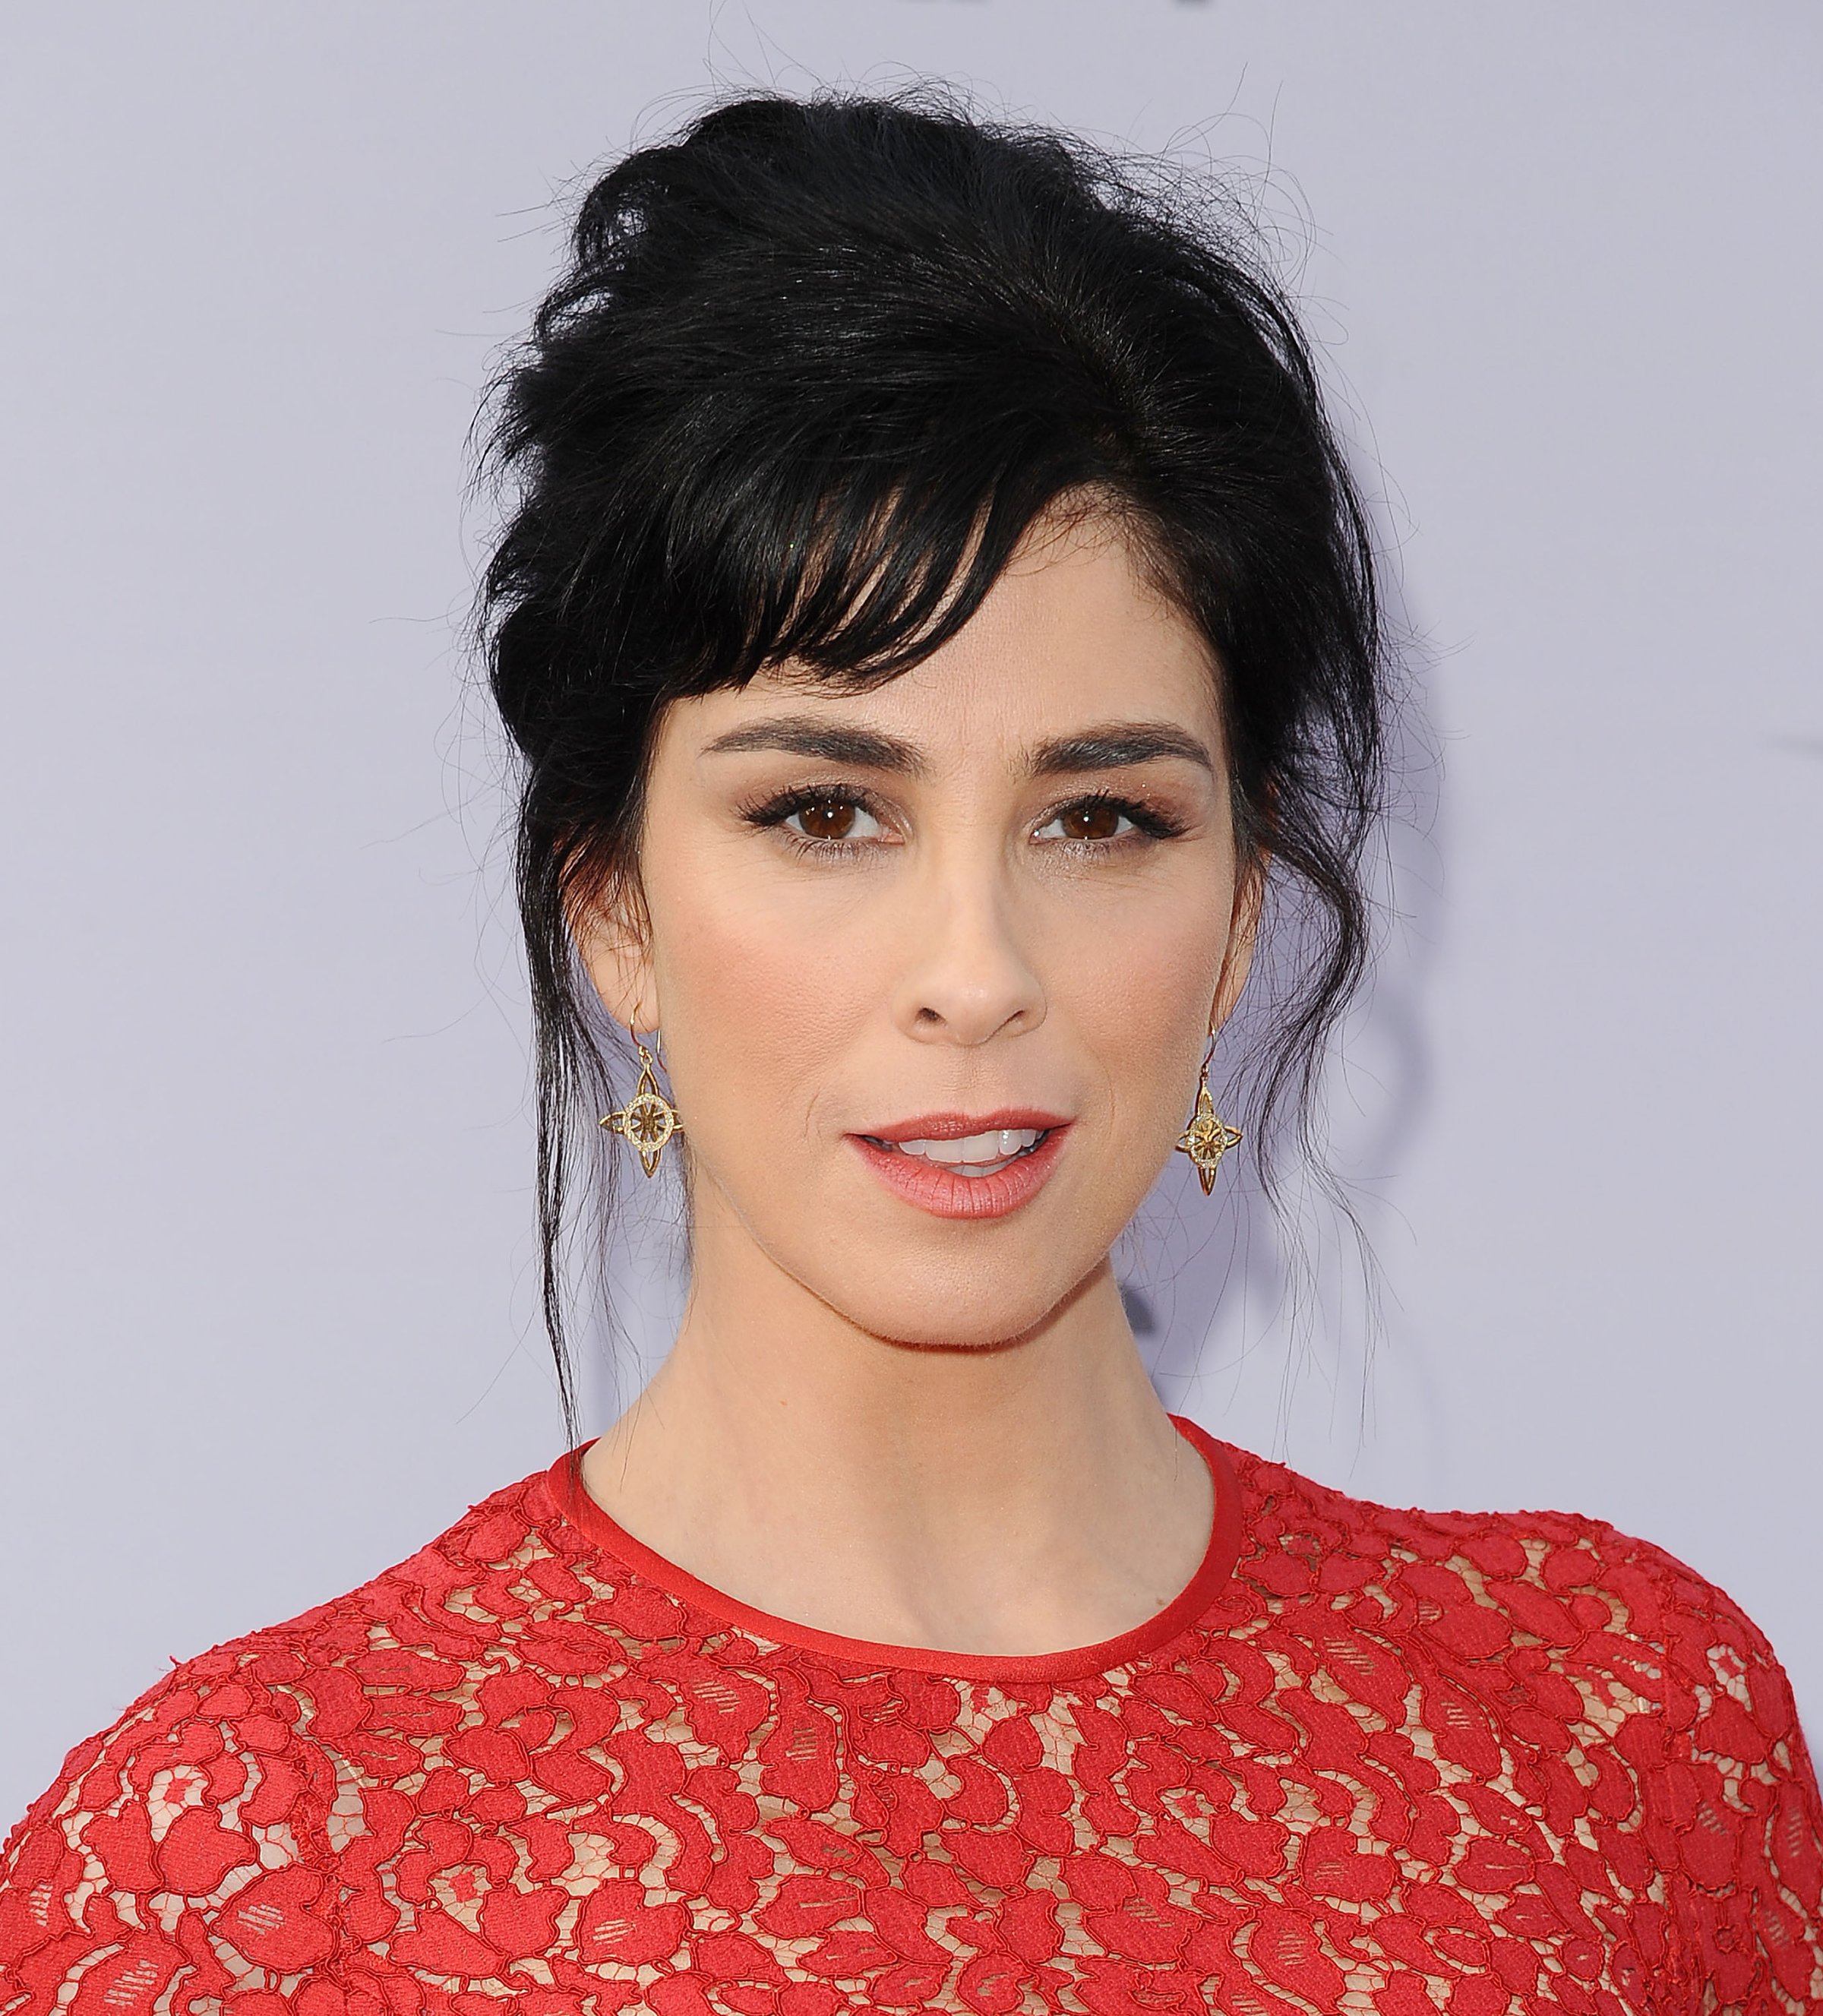 Sarah Silverman attends the AFI Life Achievement Award gala on June 4, 2015 in Hollywood, California.